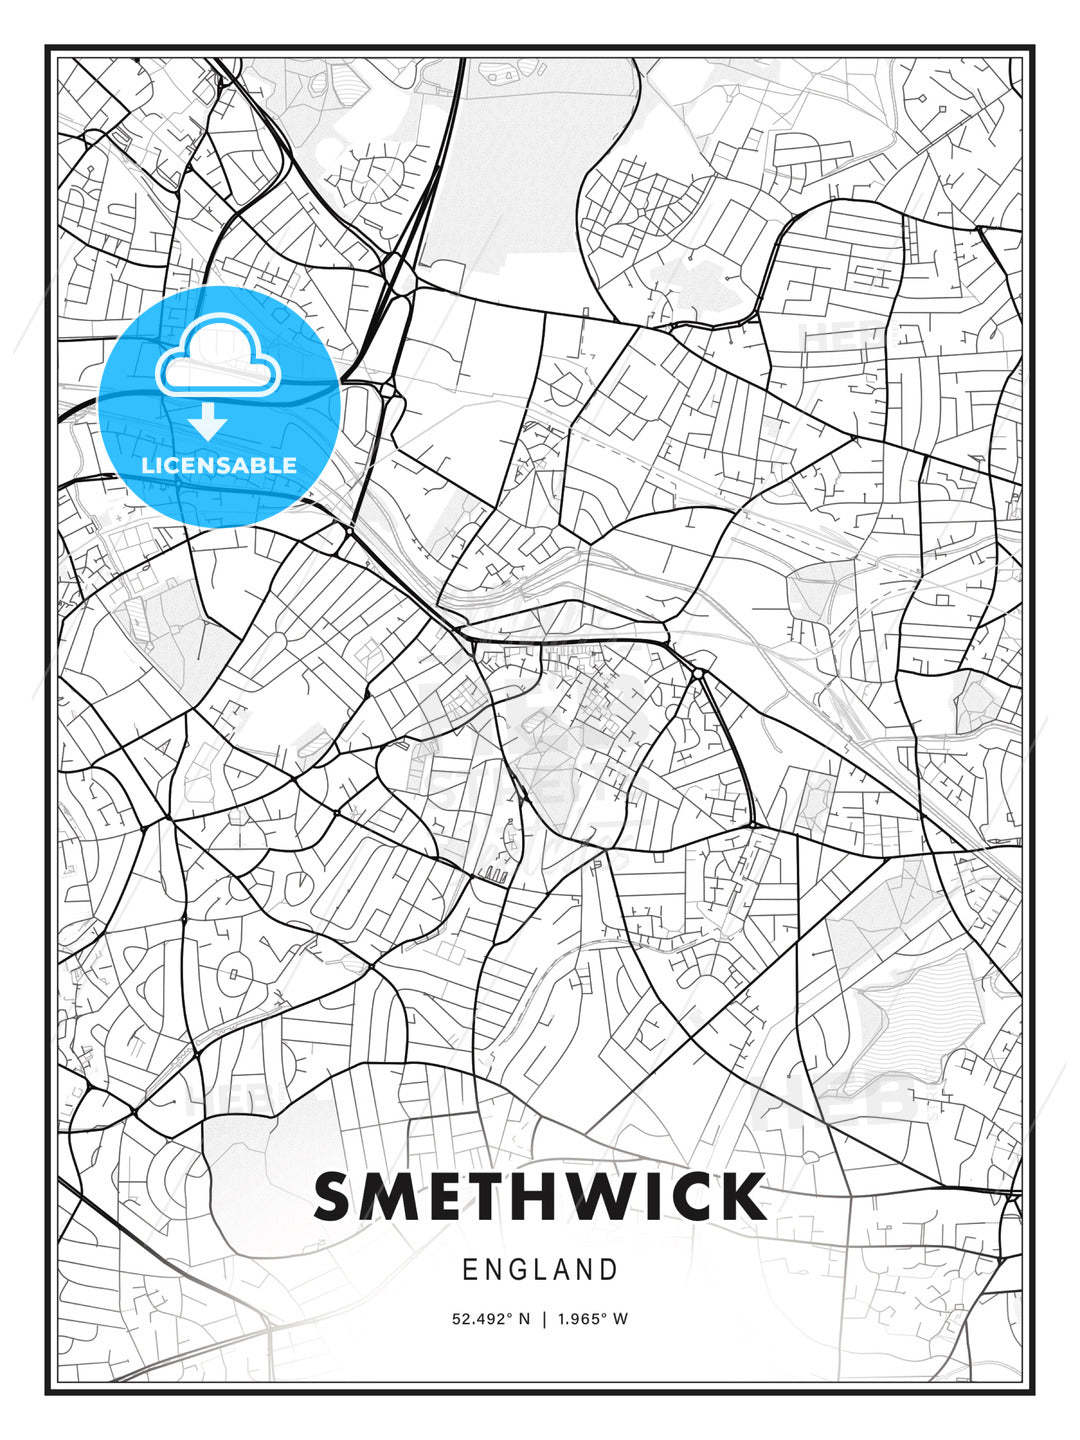 Smethwick, England, Modern Print Template in Various Formats - HEBSTREITS Sketches